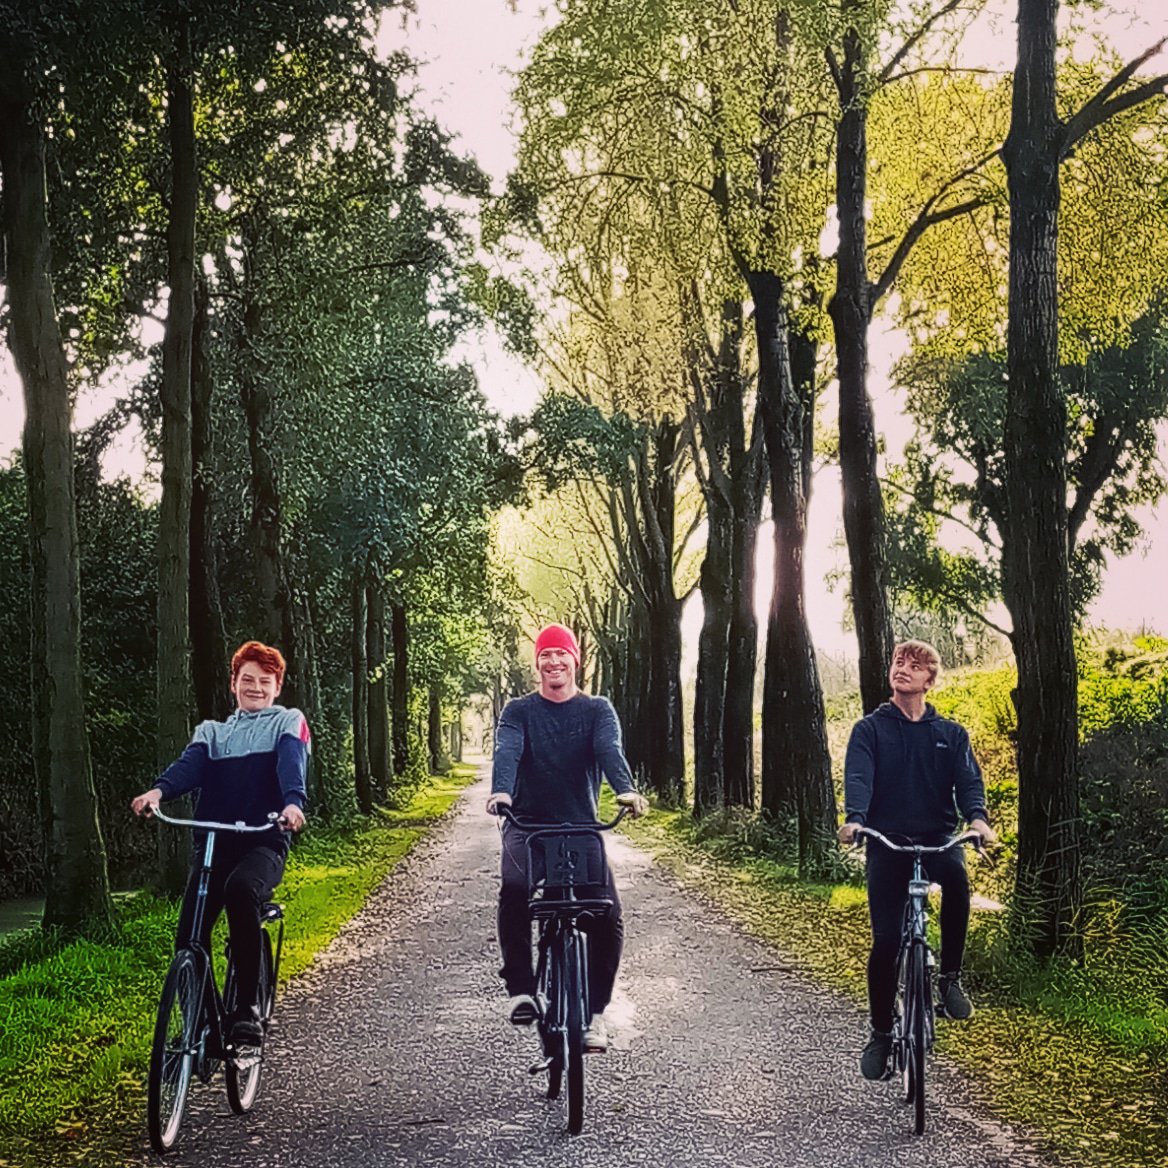 Don't these 3 look good on their bicycles? 🤣
One week in and we're already embracing the Dutch culture! 💚💚💚
#ourtravellingfamily #travelwithteens #travelwithkids #momofteens #familytravel #familygapyear #wanderers #wanderlustfamily #theroadisourhome #gofurther #thesimplelife